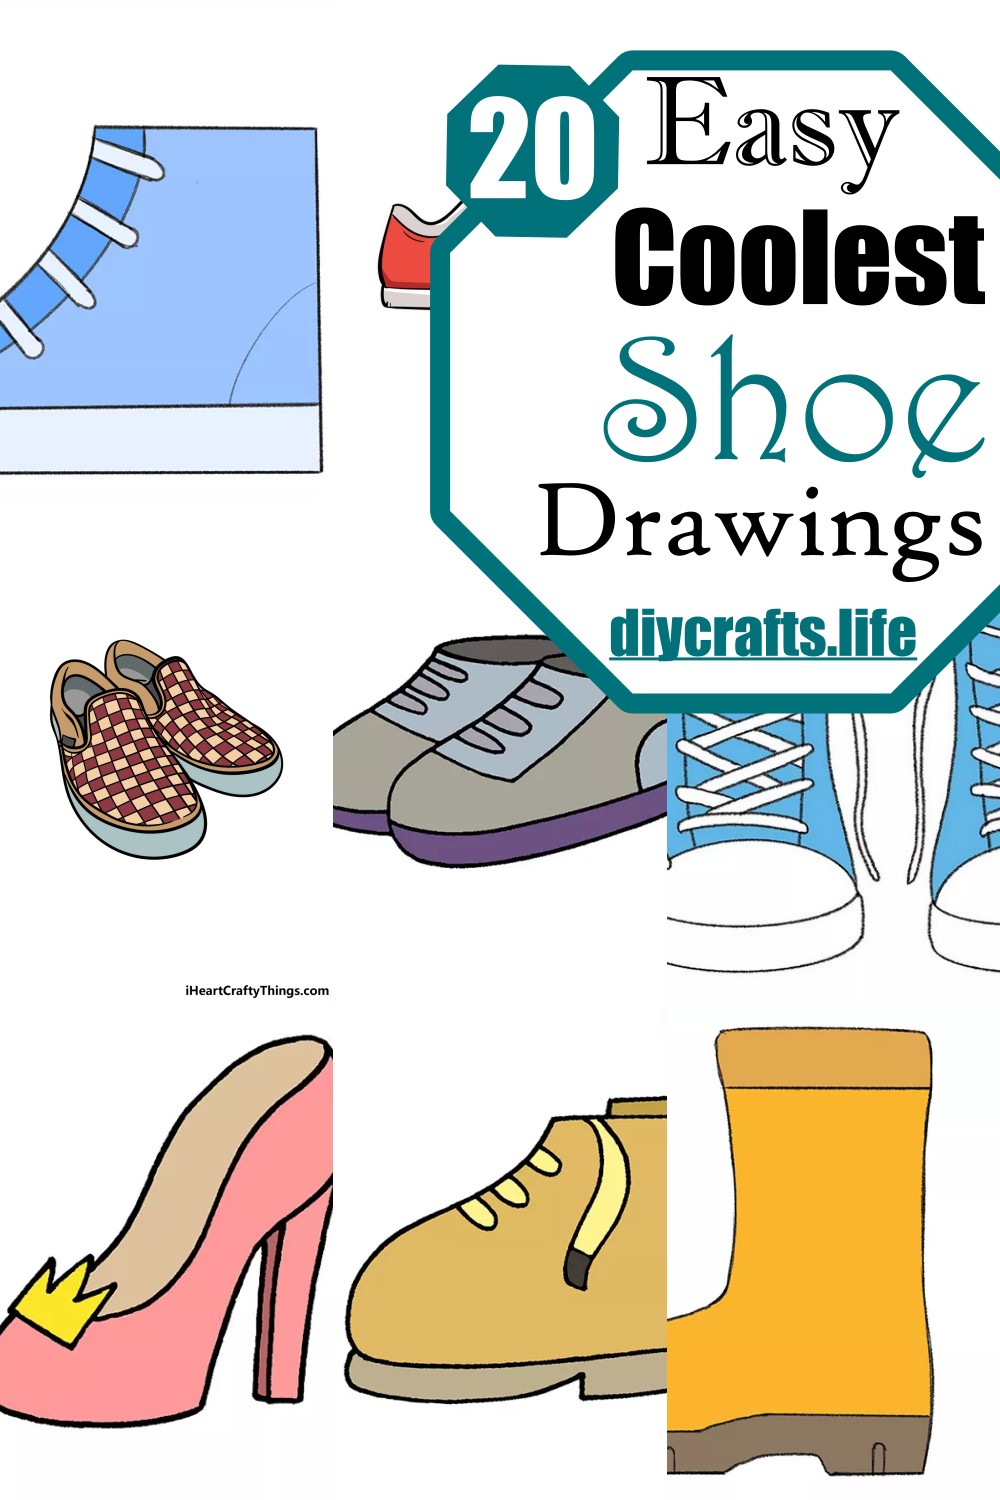 Easy Coolest Shoe Drawings